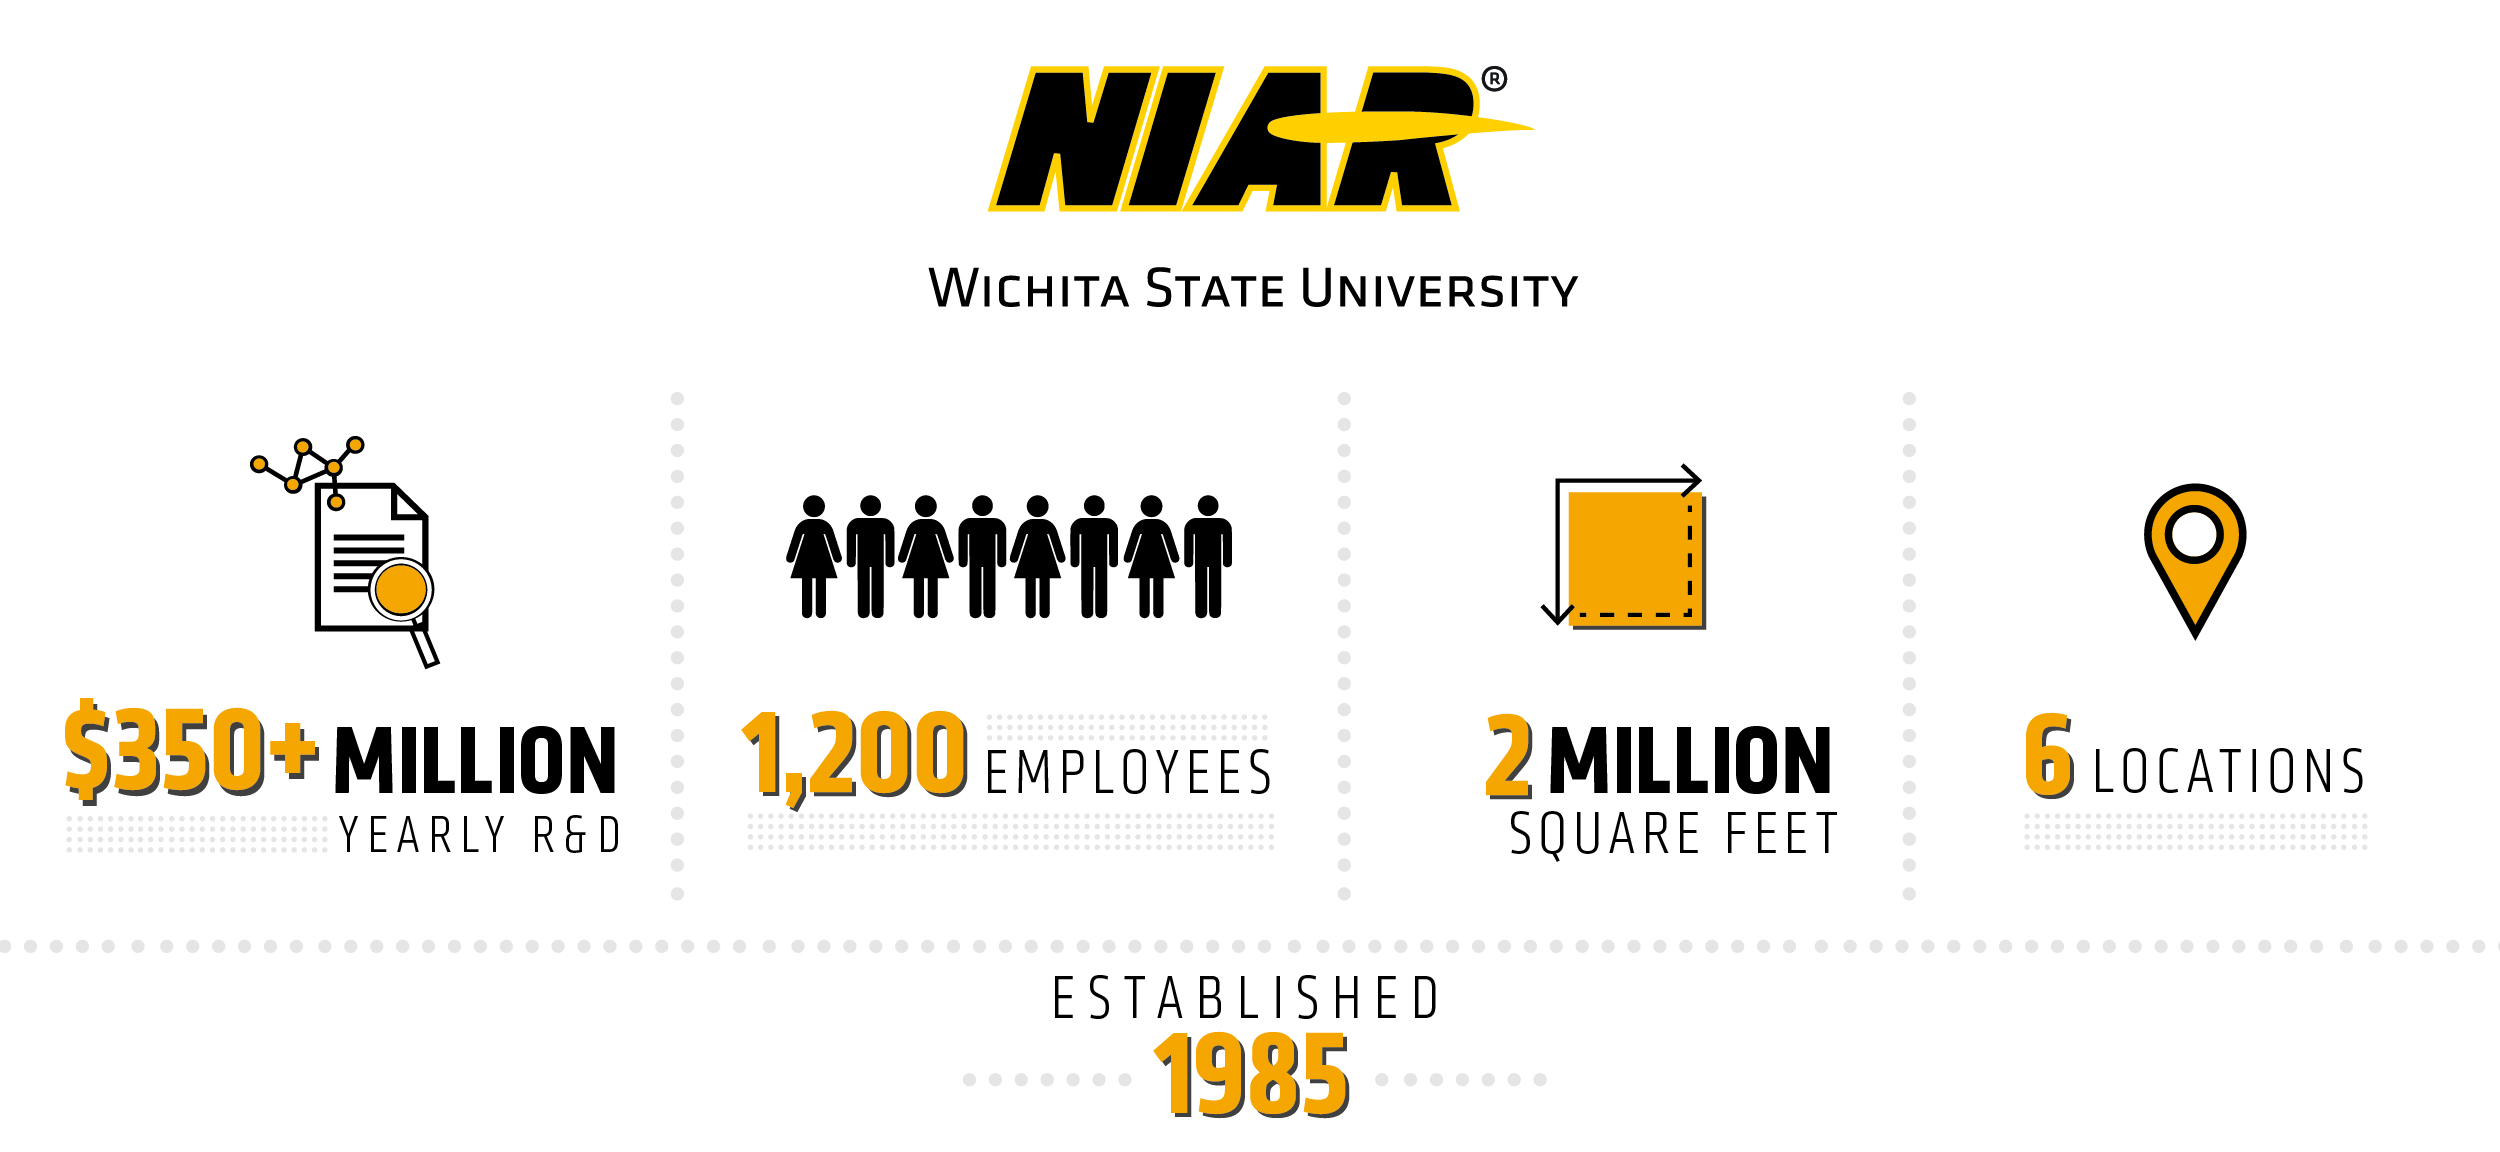 NIAR Fast Facts graphic: $350+ million yearly R&D, 1,200 employees, 2+ million square feet, 6 locations, established in 1985